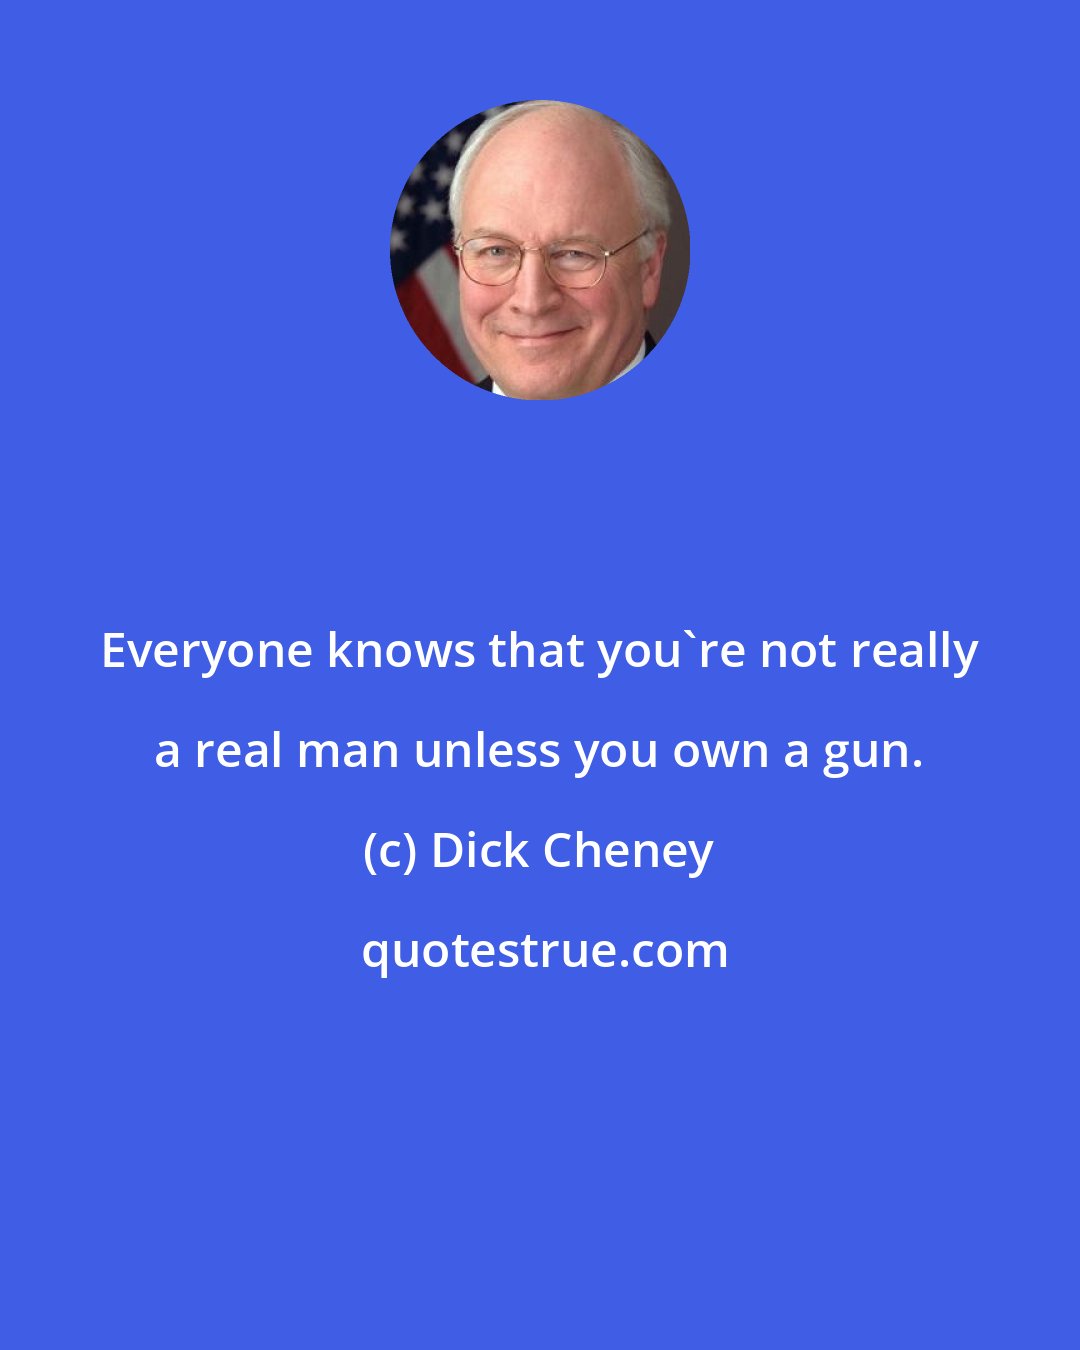 Dick Cheney: Everyone knows that you're not really a real man unless you own a gun.